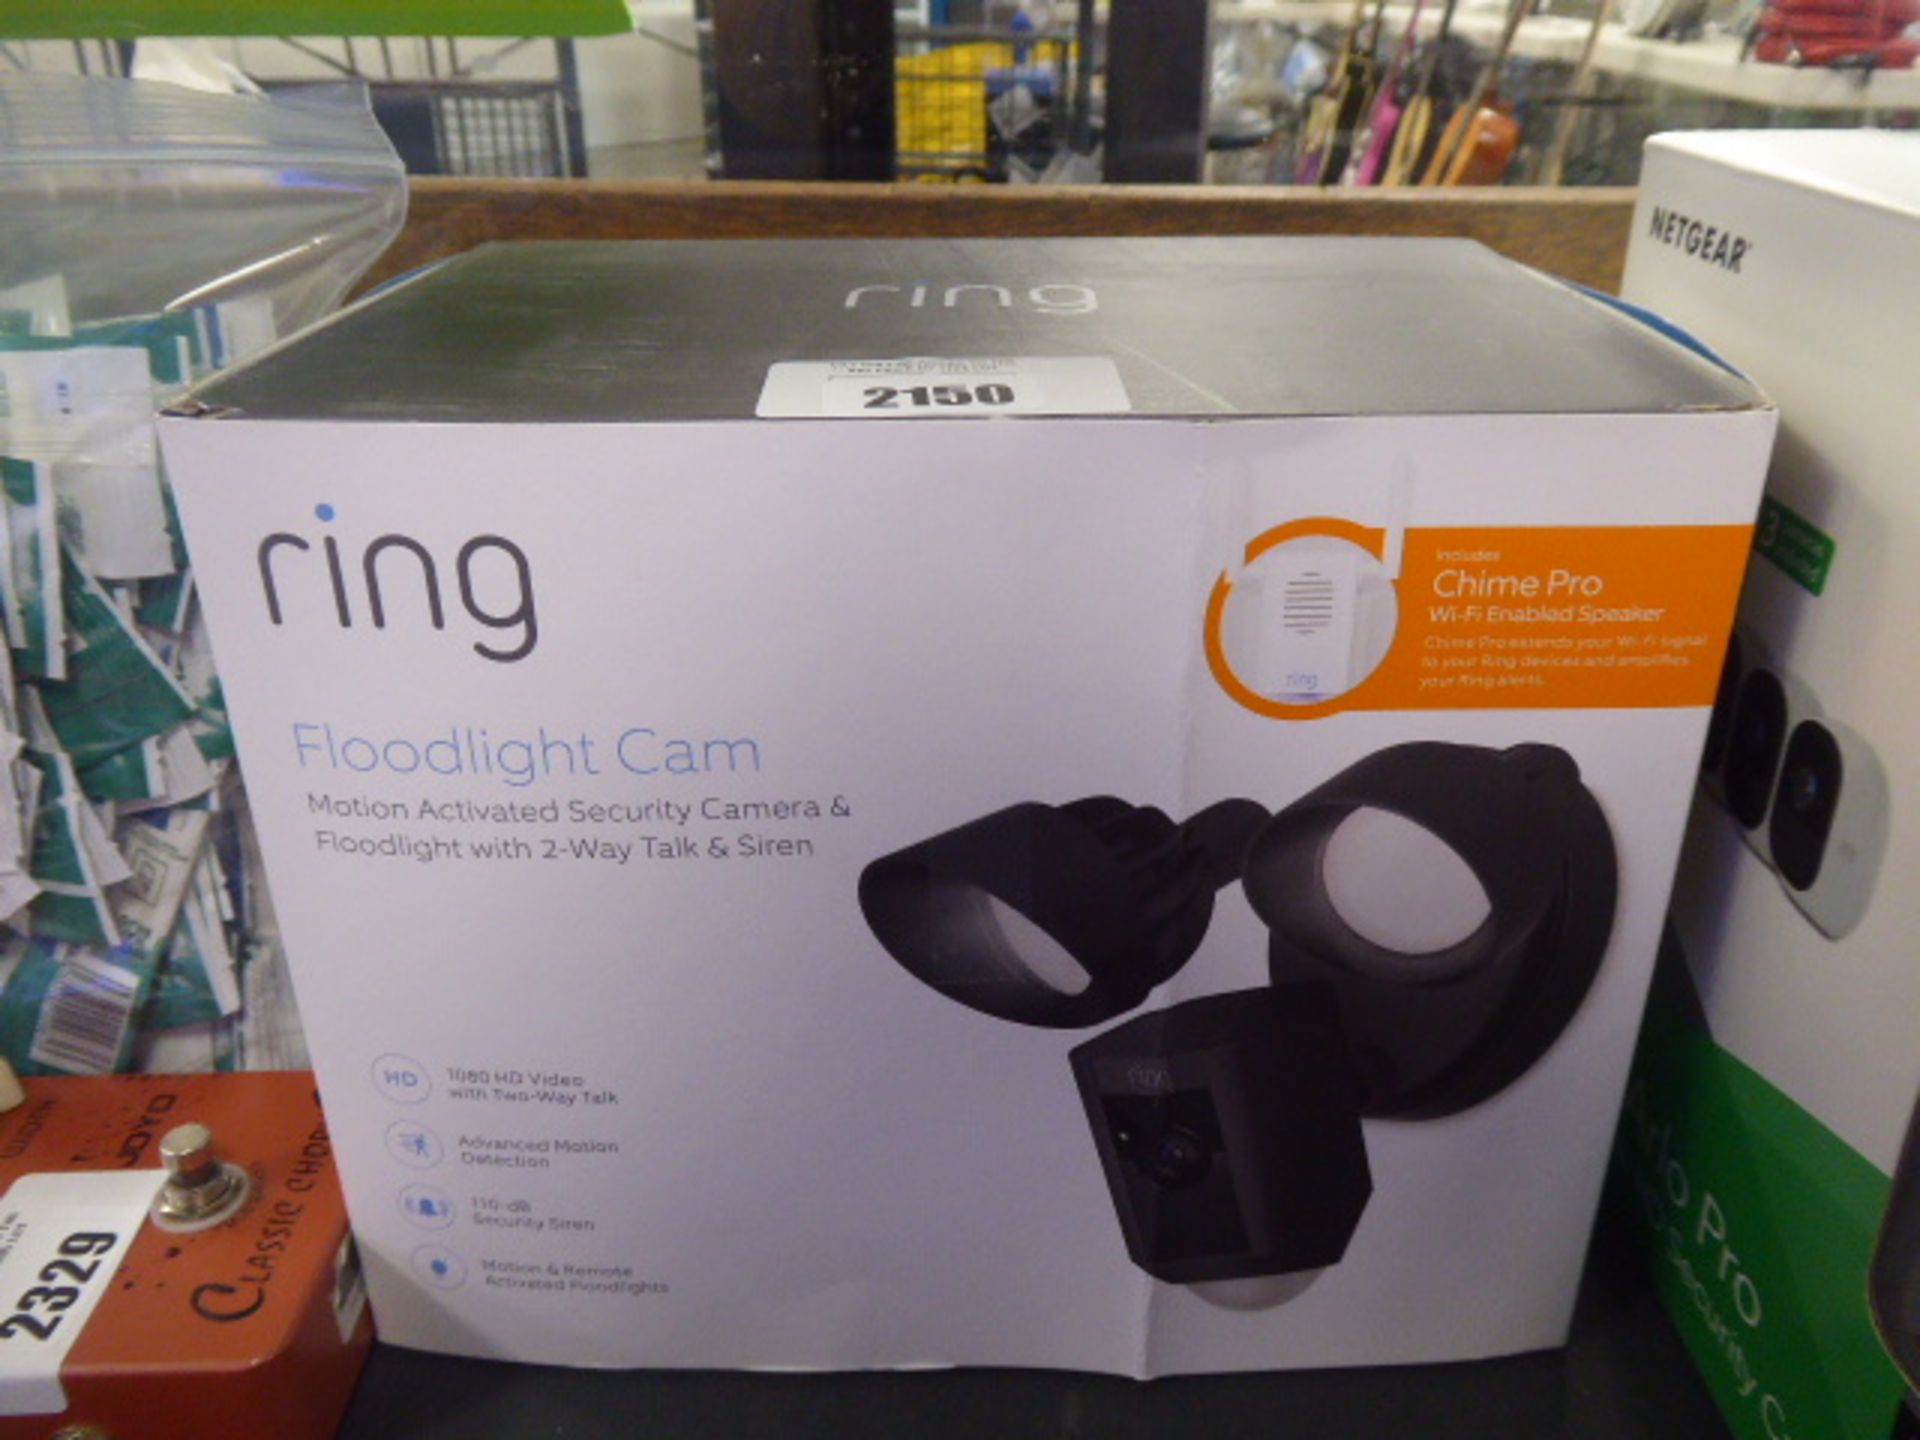 Ring floodlight cam system in box no chime (floodlight only)